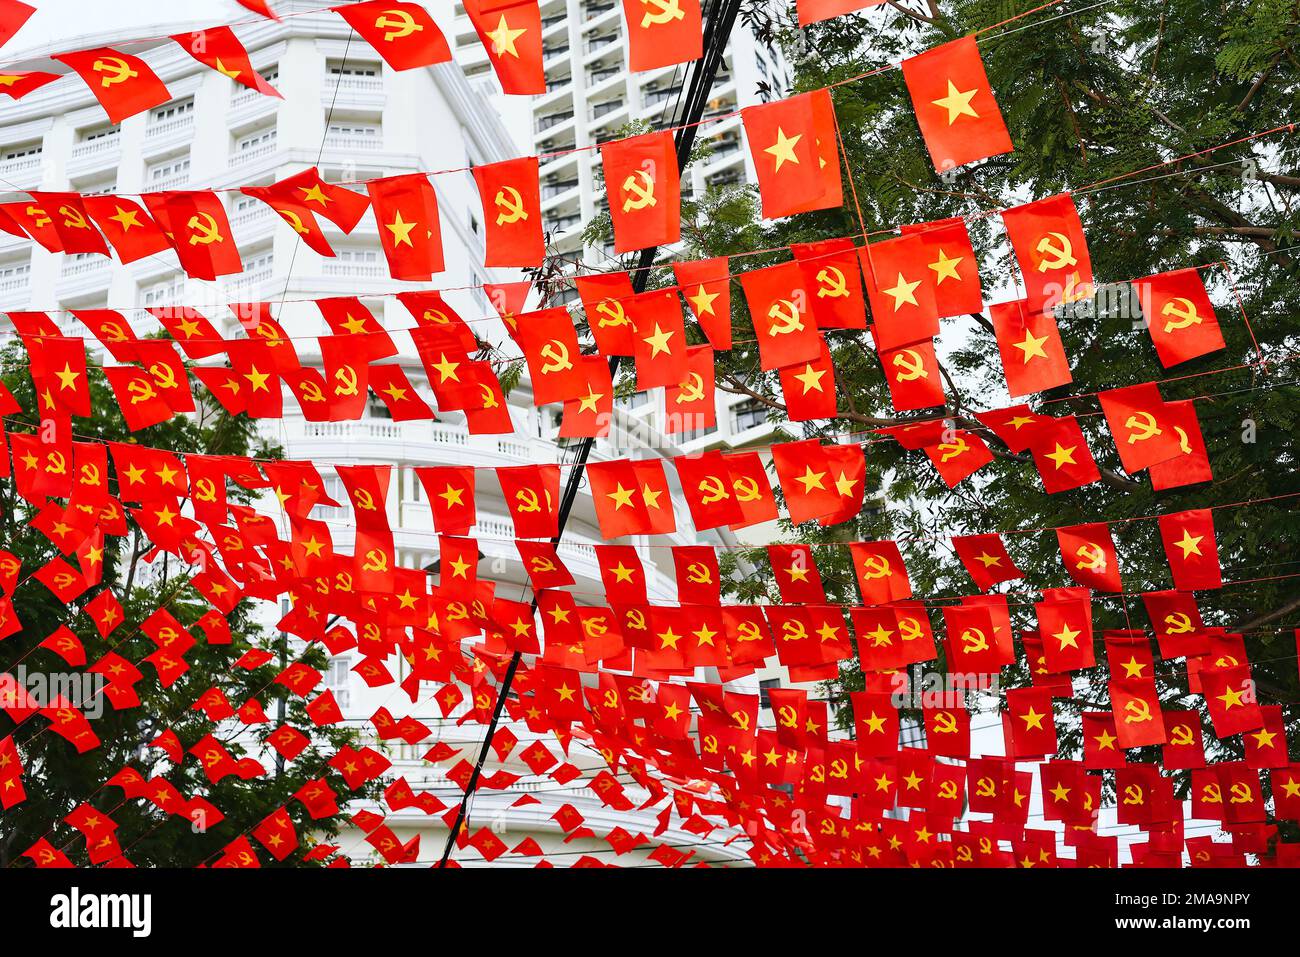 Vietnamese flags and communism flags in Nha Trang Vietnam Stock Photo